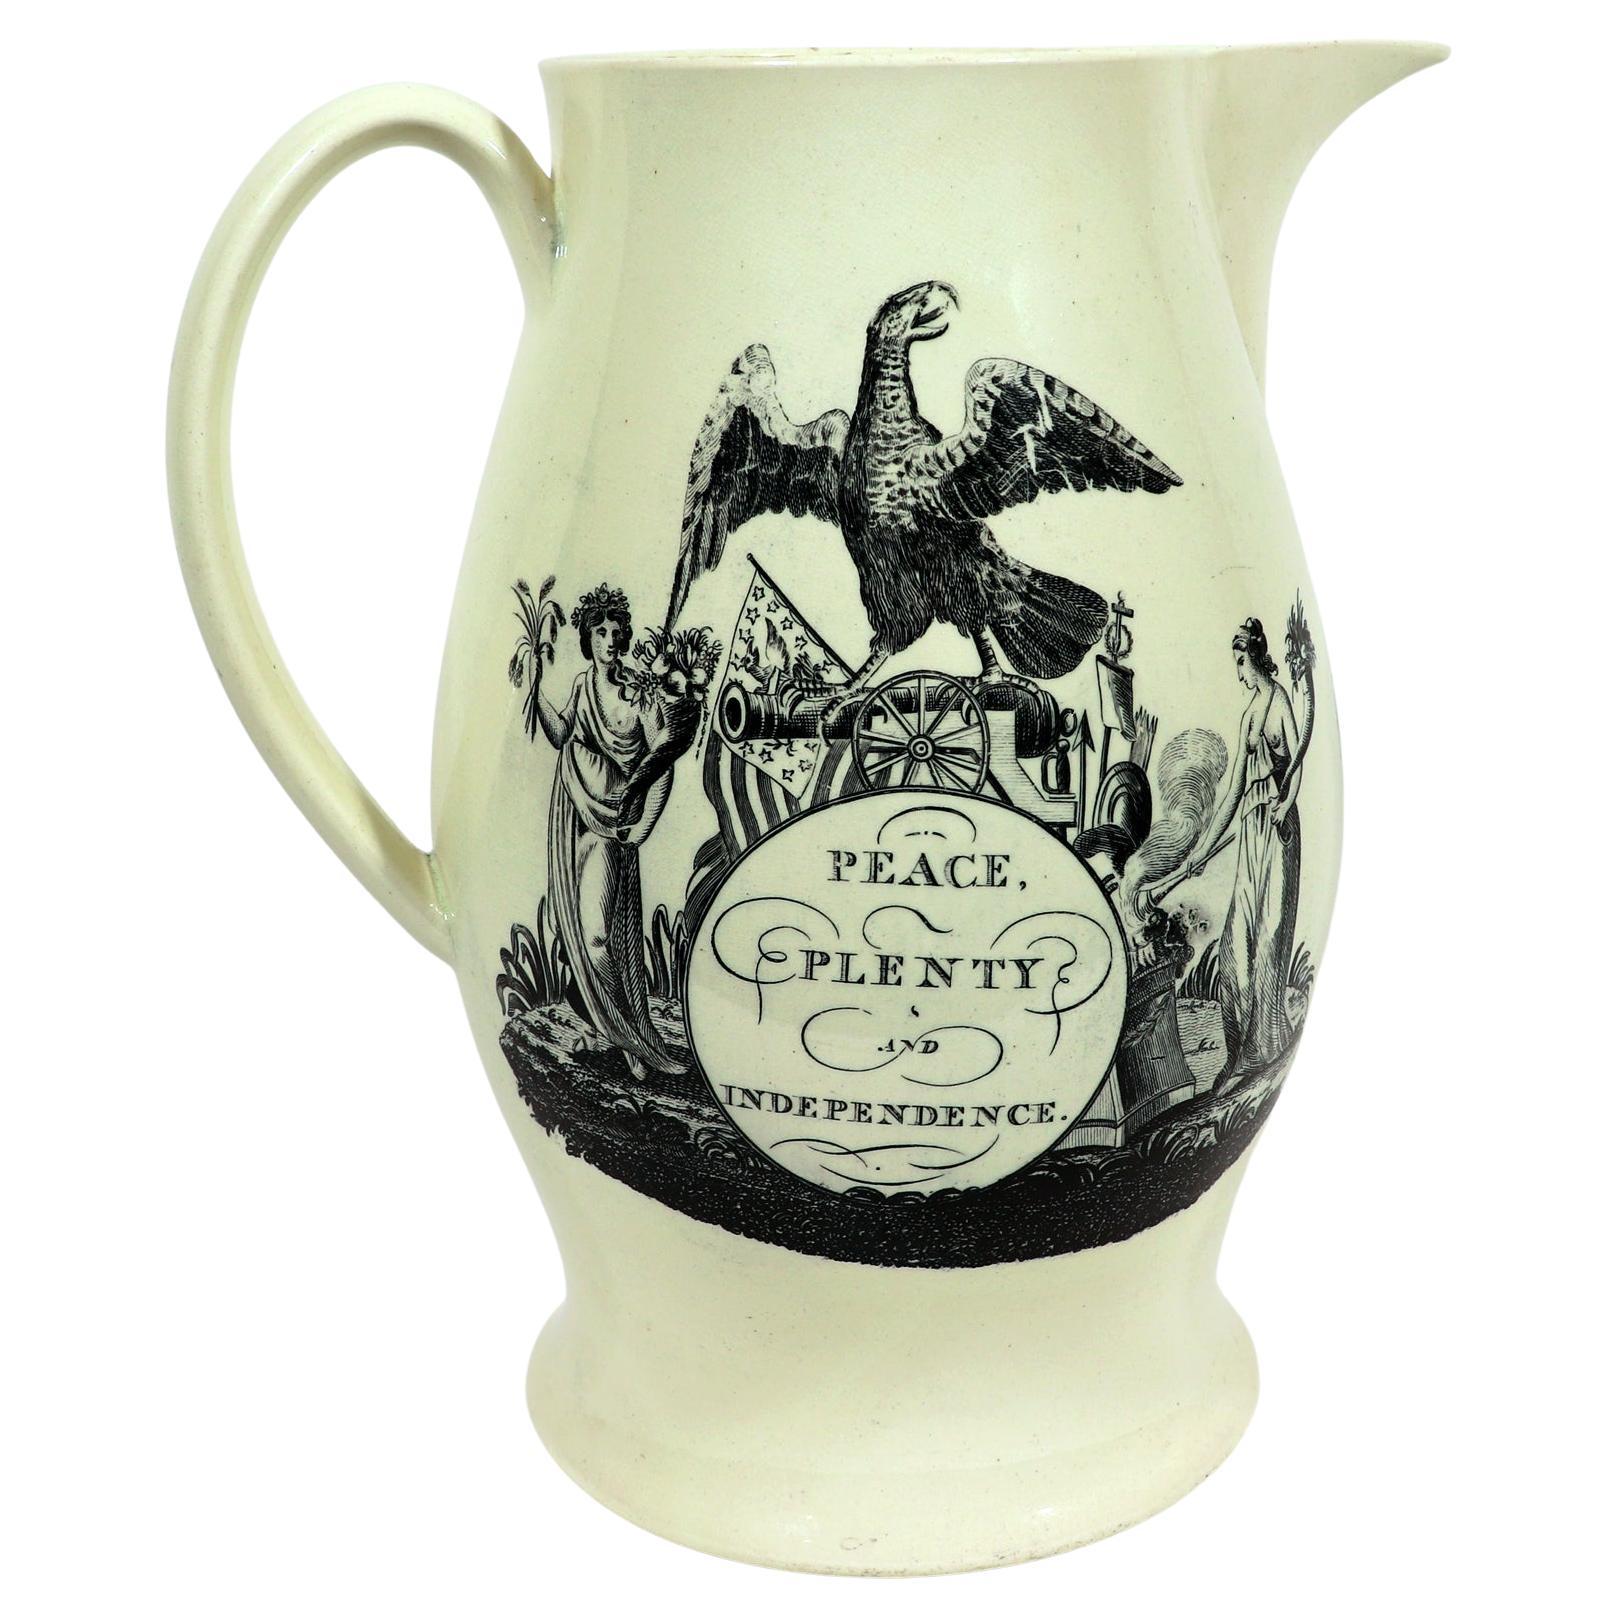 American-Market "Peace, Plenty and Independence" Liverpool Creamware Jug For Sale